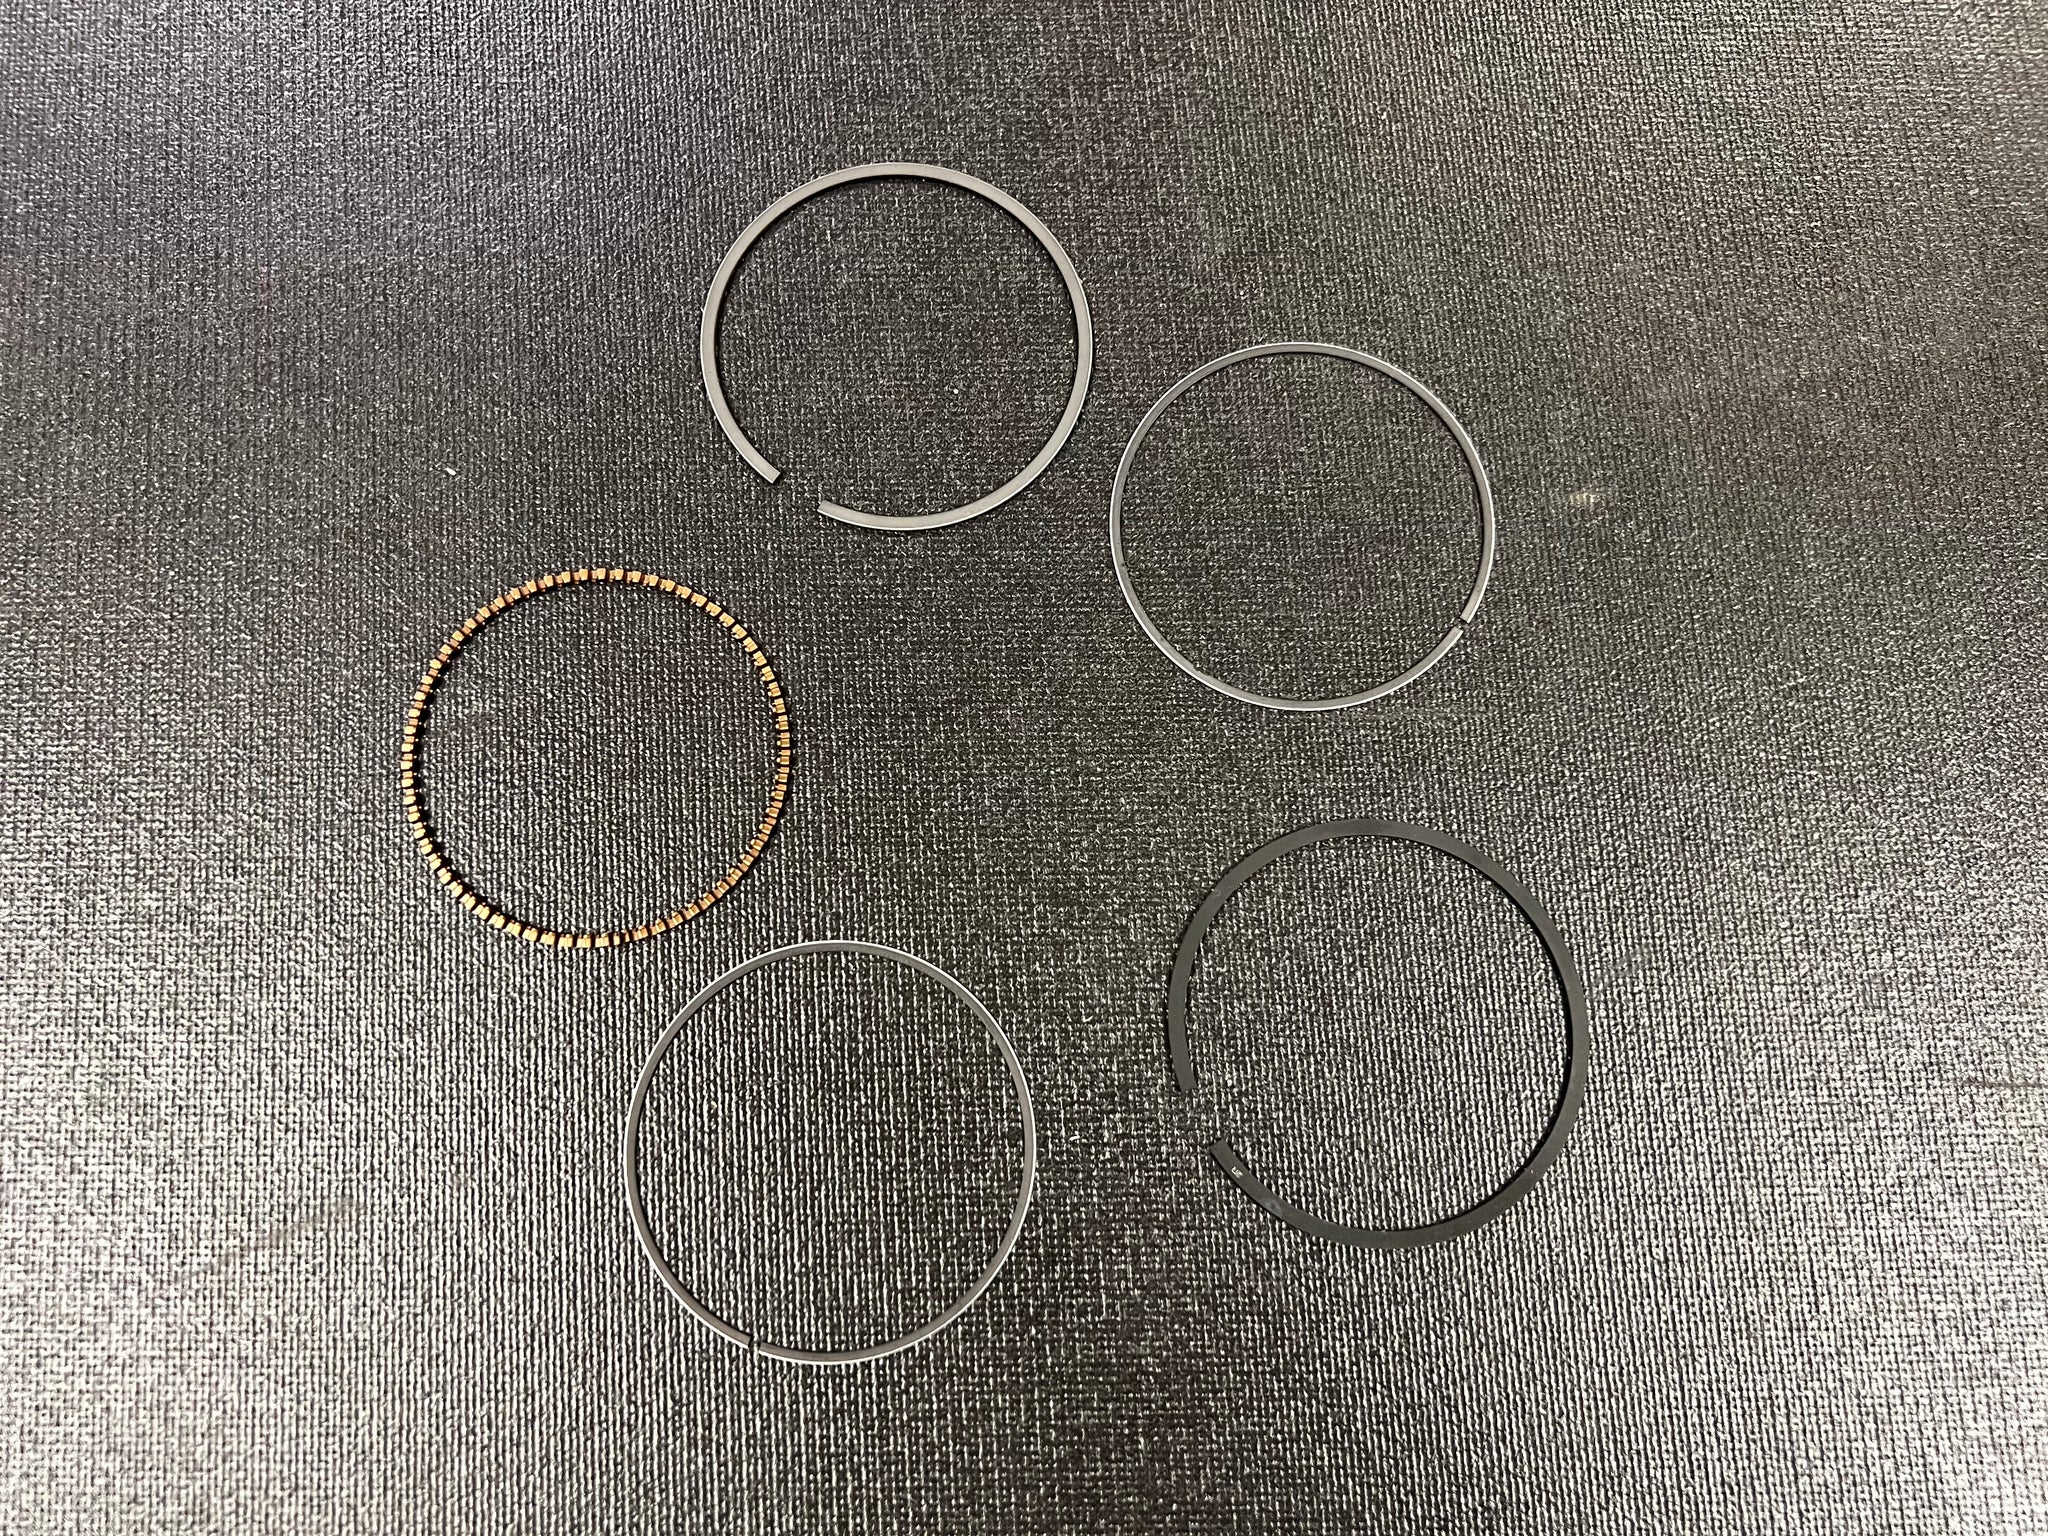 GY6 61mm NCY Replacement piston ring set.